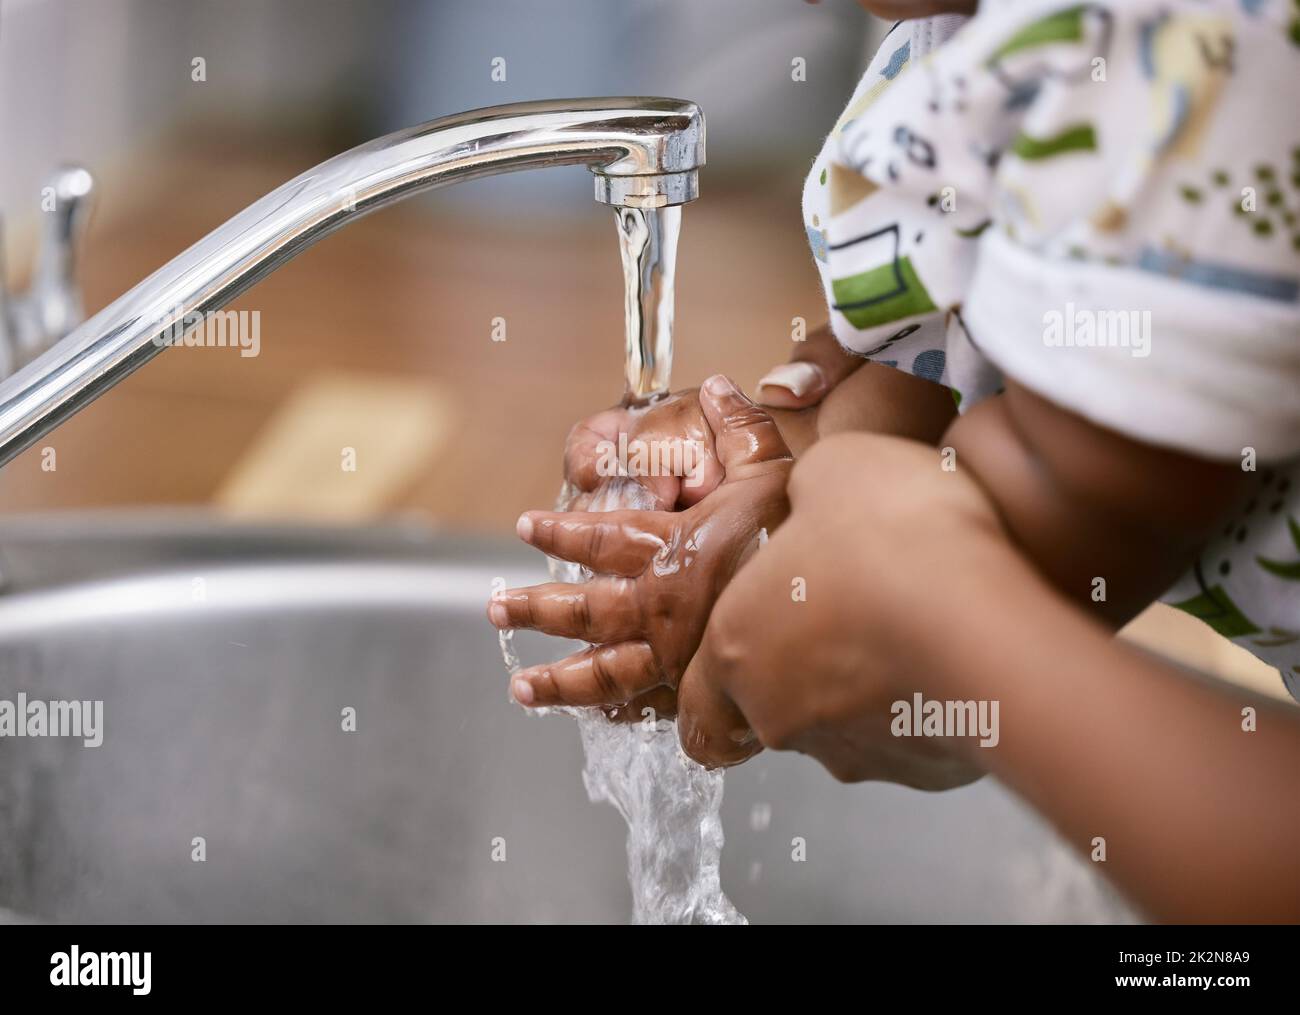 Keeping our hands clean. Shot of an unrecognizable child and parent washing their hands at home. Stock Photo